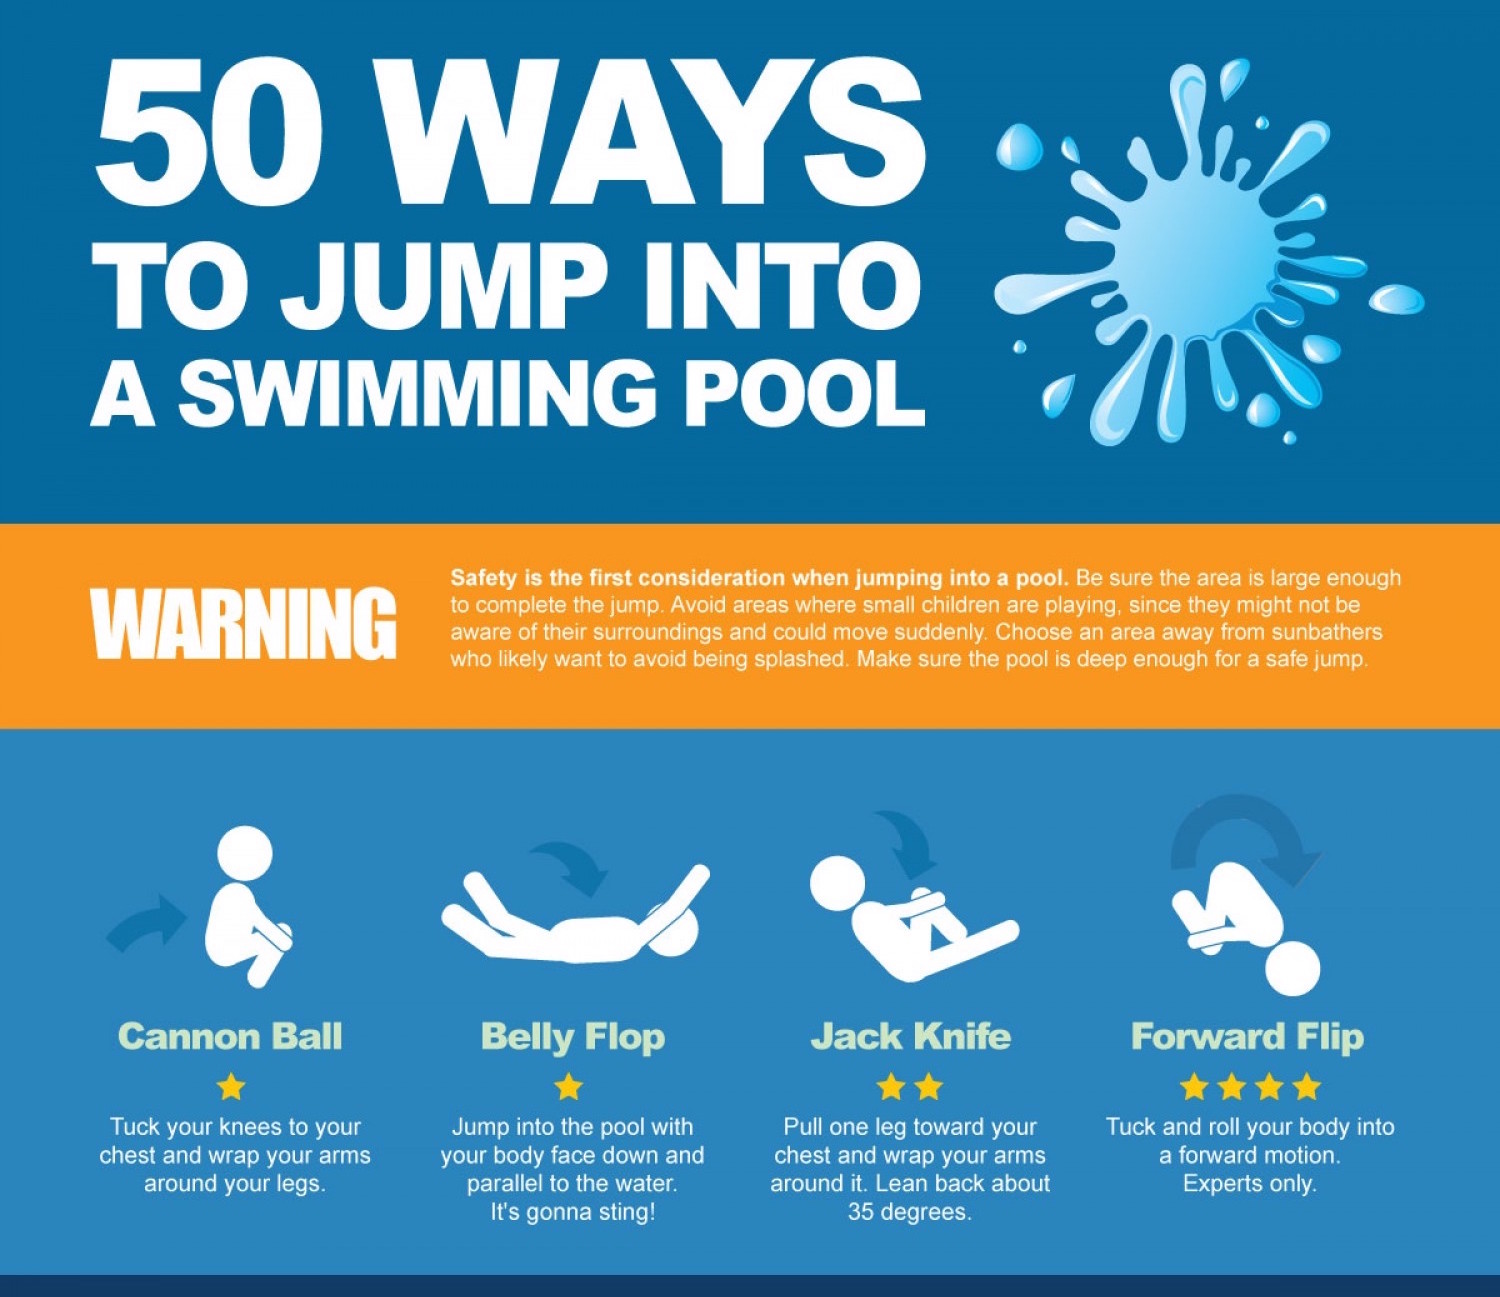 50 Ways To Jump Into A Pool!